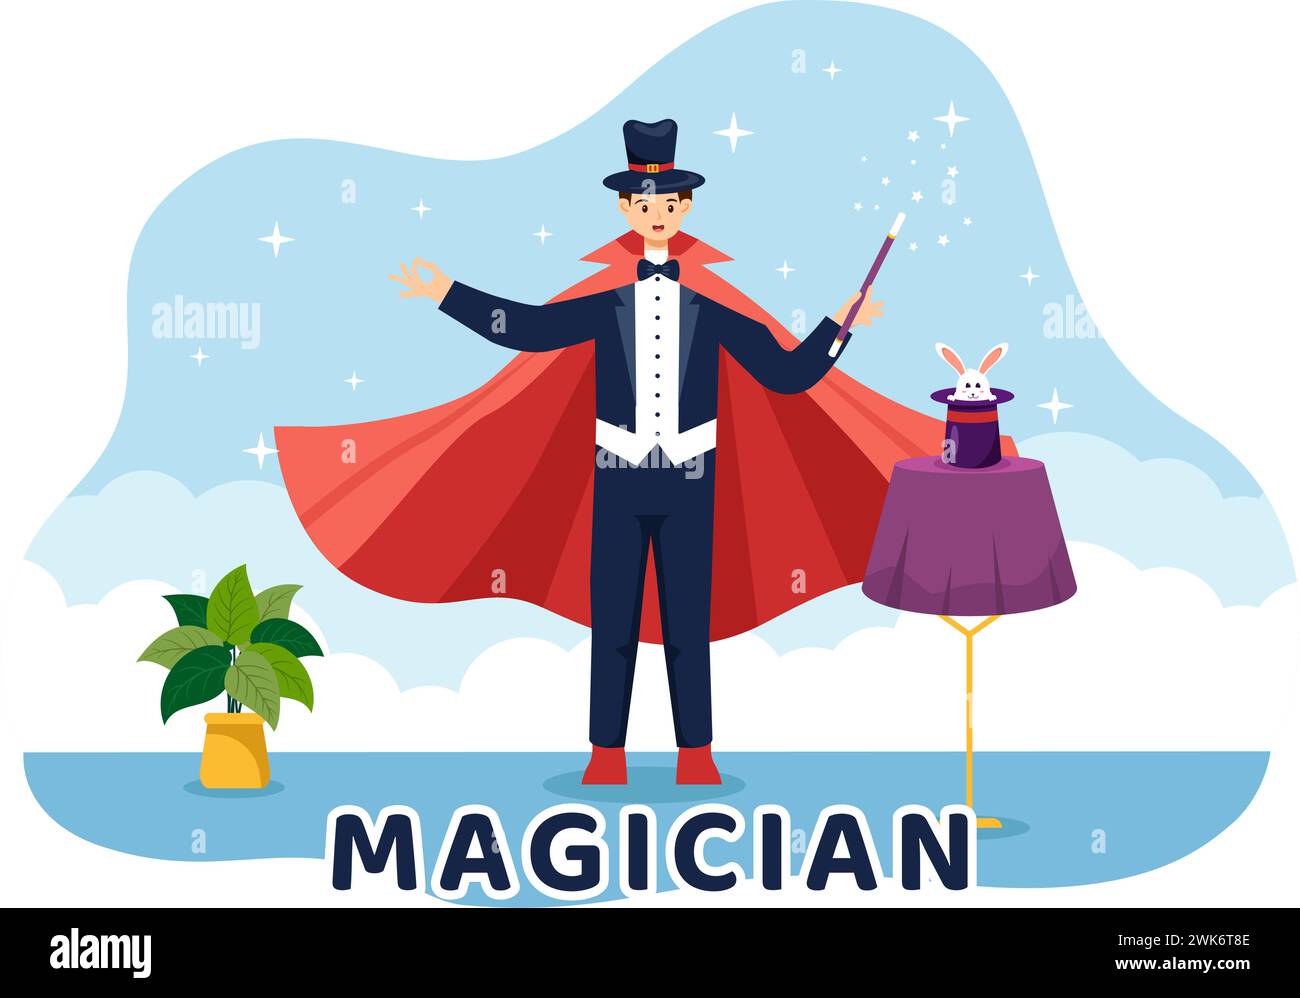 Magician Vector Illustration with Illusionist Conjuring Tricks and Waving a Magic Wand above his Mysterious Hat on a Stage in Flat Cartoon Background Stock Vector